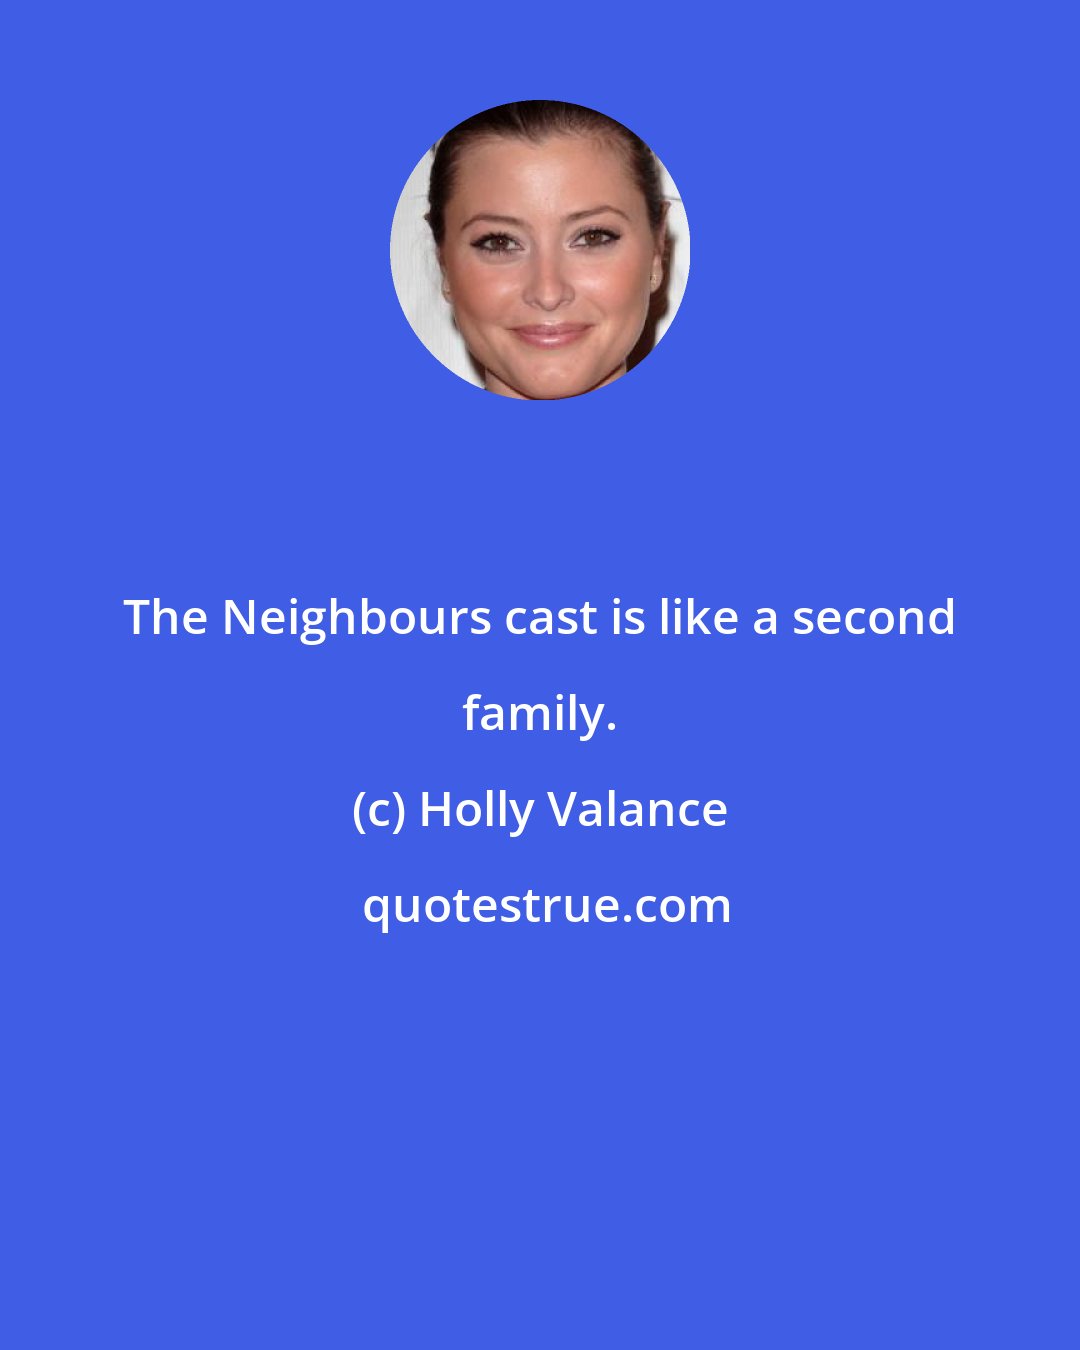 Holly Valance: The Neighbours cast is like a second family.